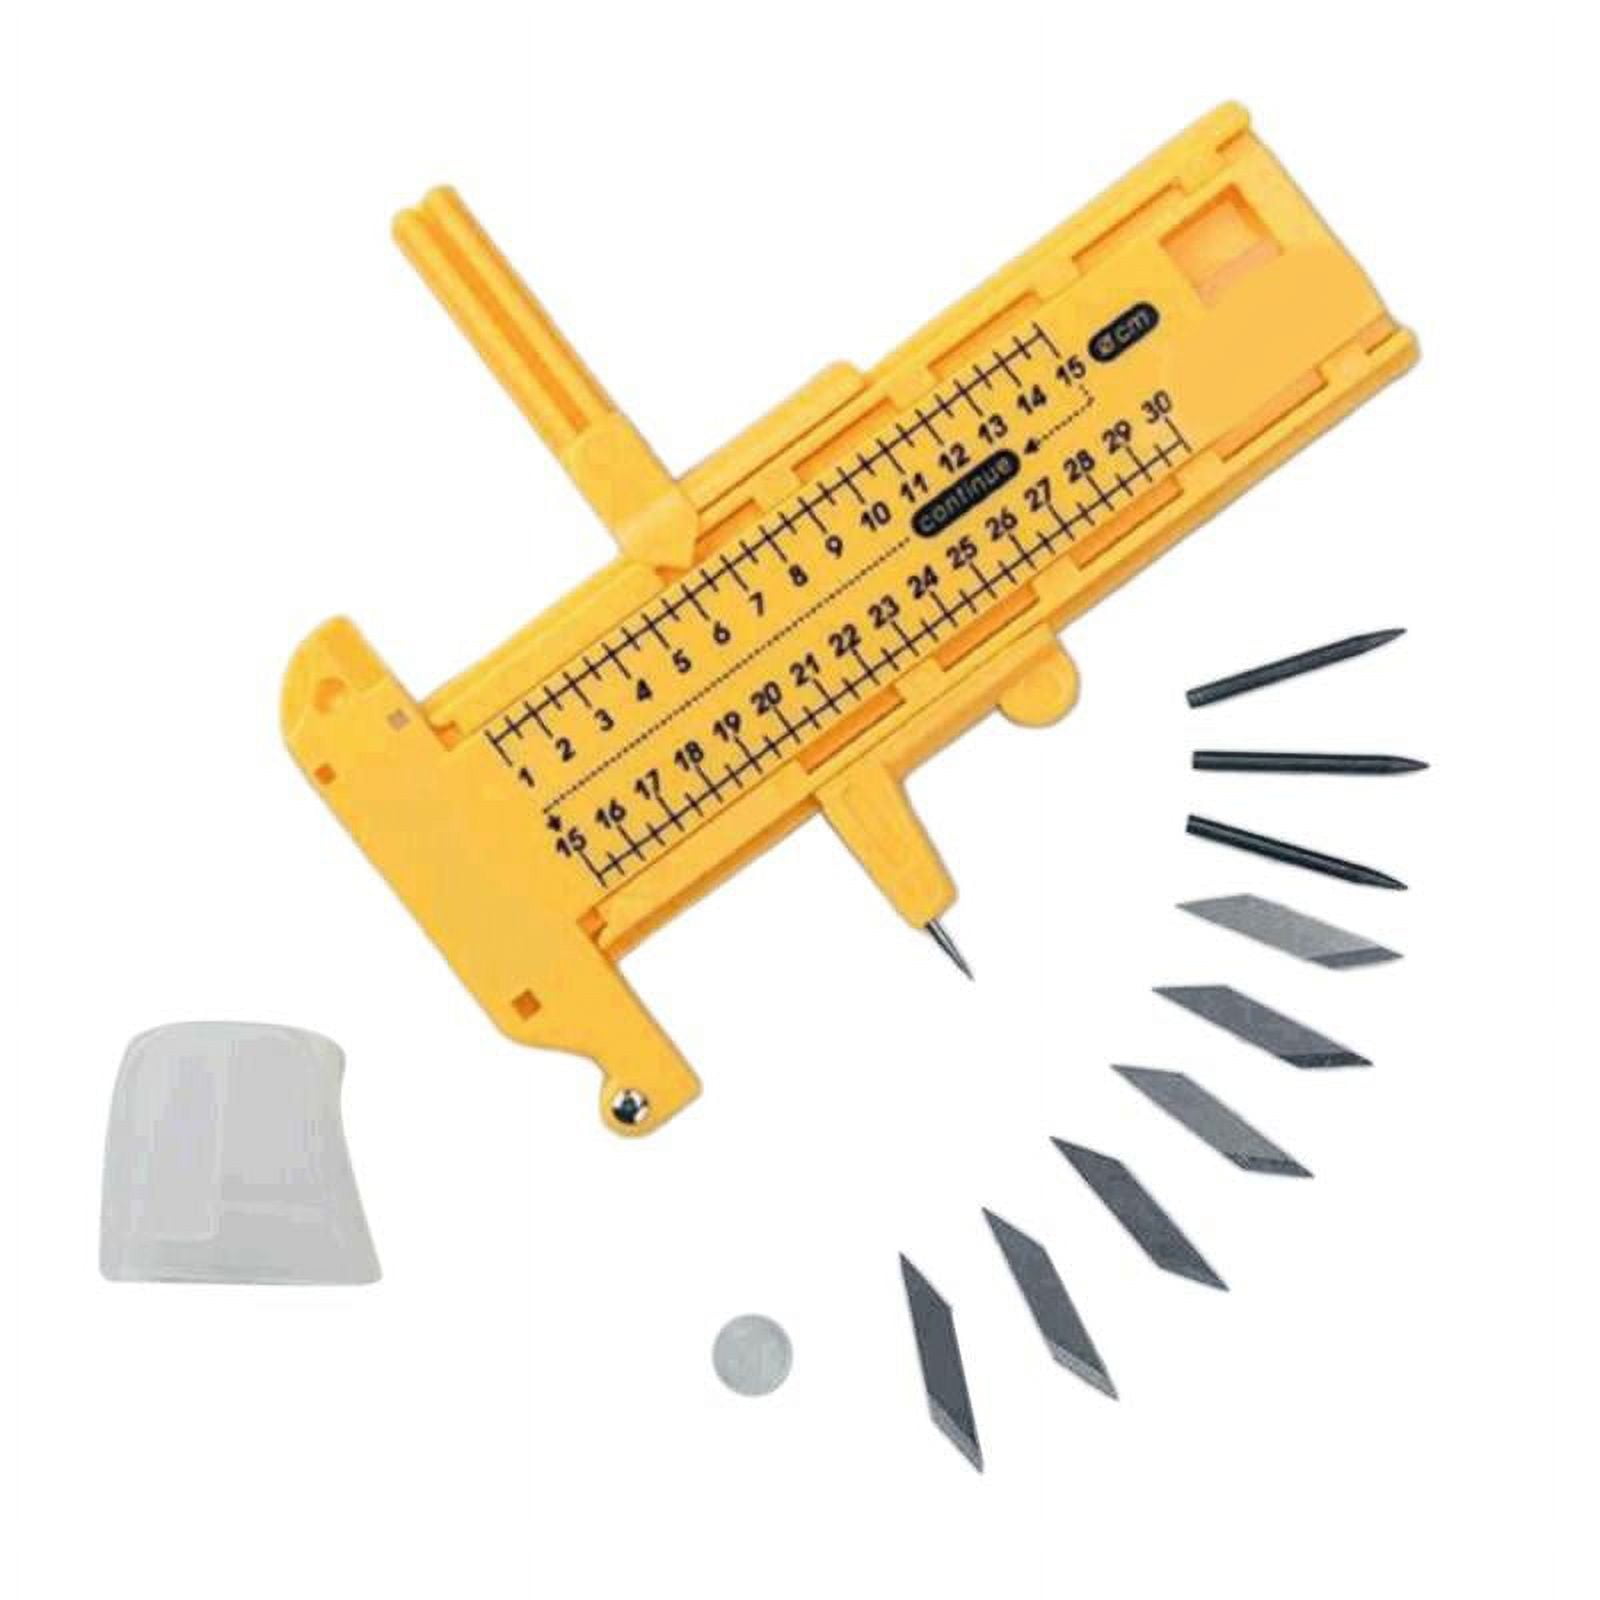 DAFA Compass Cutter for Cutting Paper Films Leather With 5